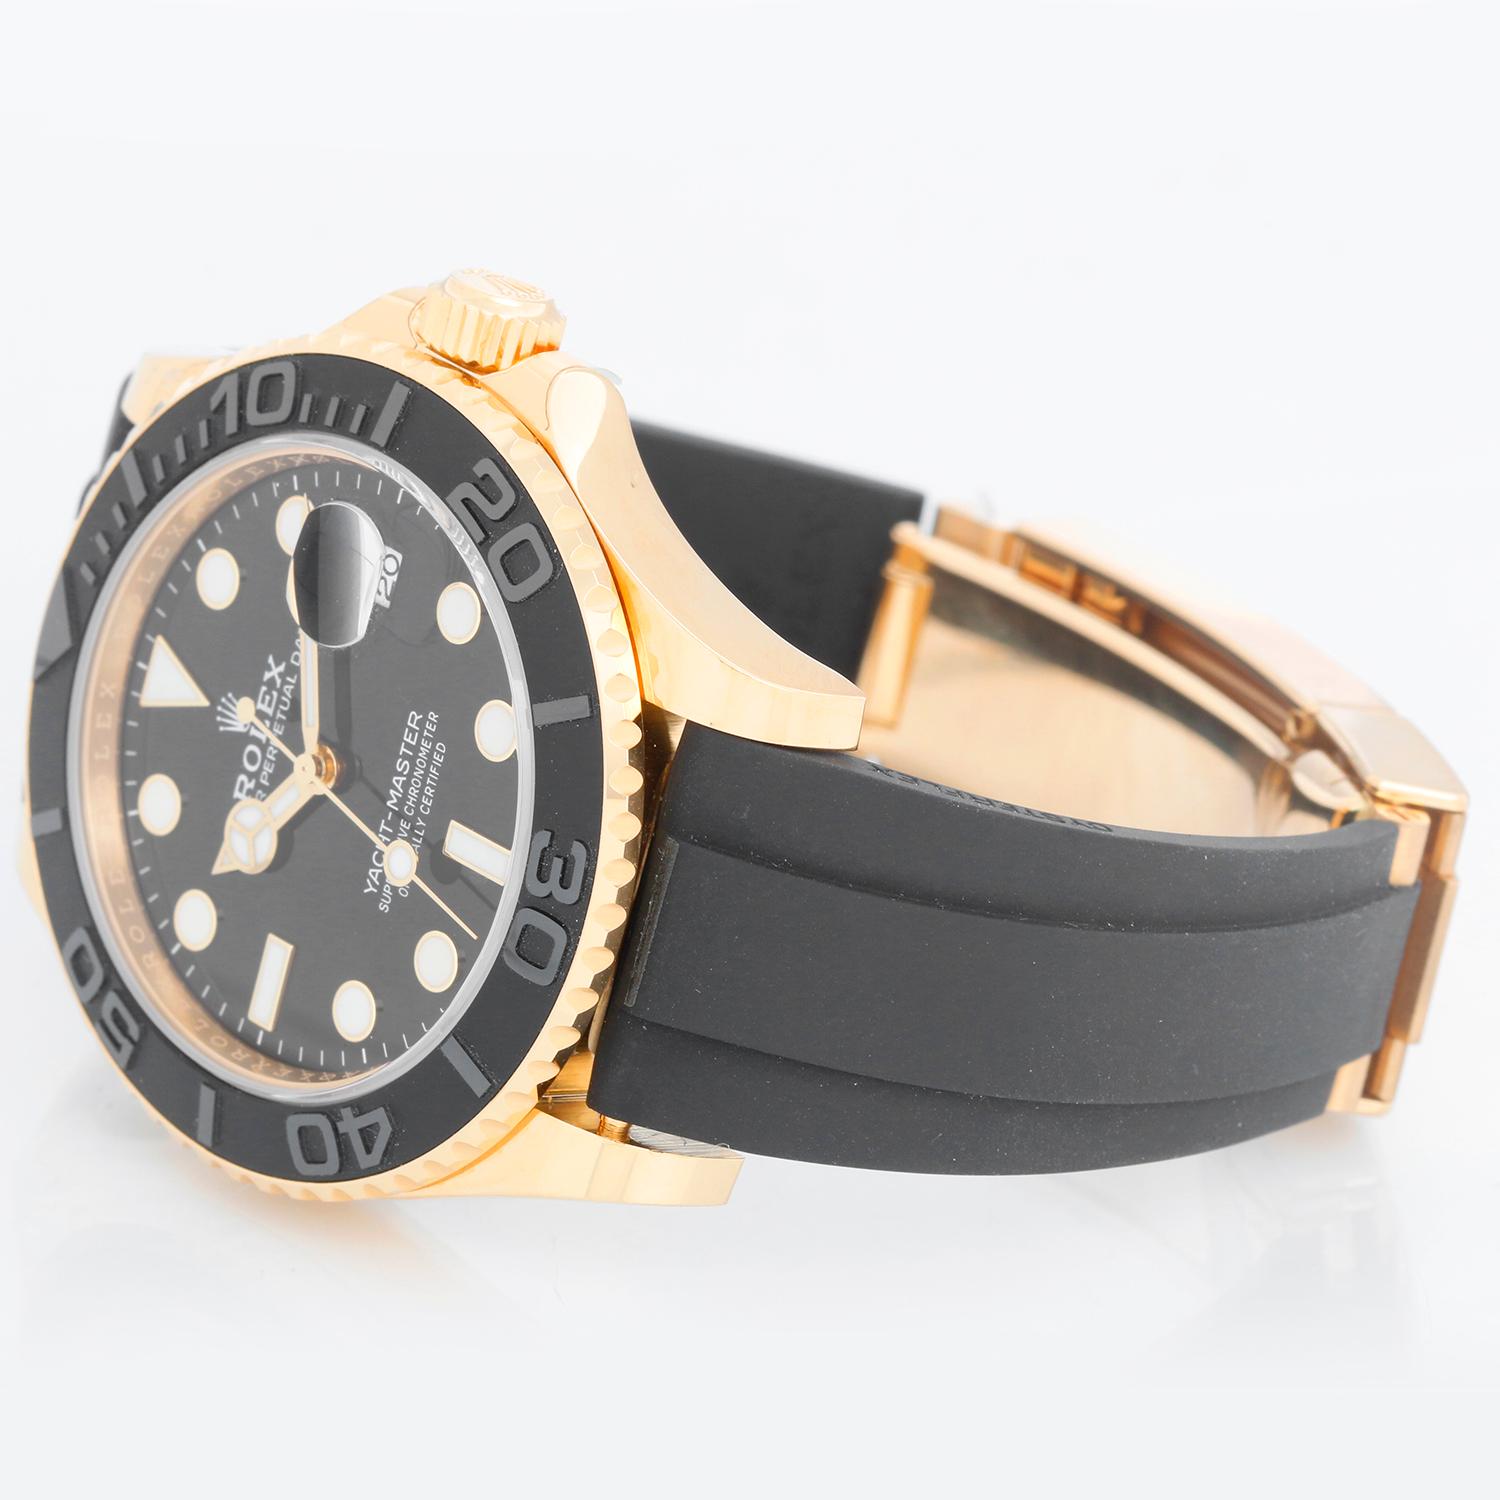 Rolex Yacht-Master Oysterflex 18k Yellow Gold Men's Watch 226658 - Automatic winding. 18k yellow gold case and rotating bezel with black insert (42mm diameter). Black Maxi dial with luminous style white hour markers. Black Rolex Oysterflex rubber